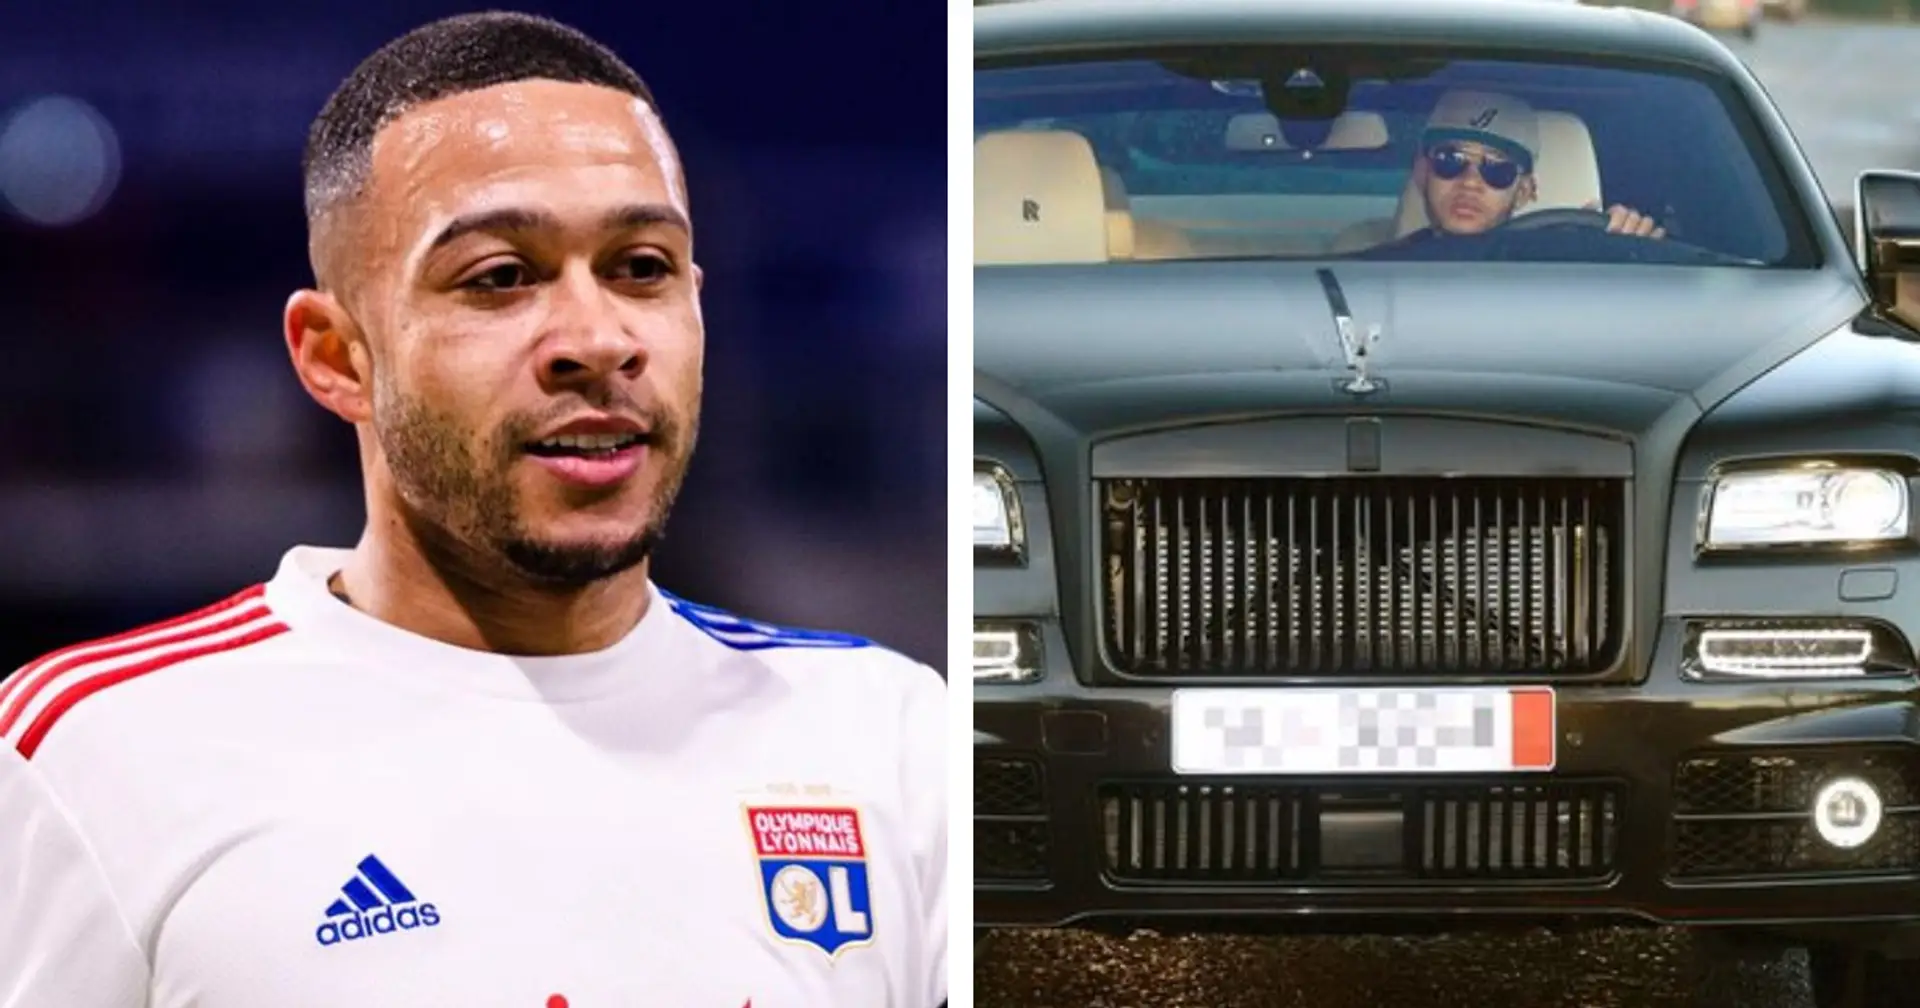 'They talk about my hat and f***ing s**t': Memphis Depay slams critics over Rolls-Royce incident at Man United